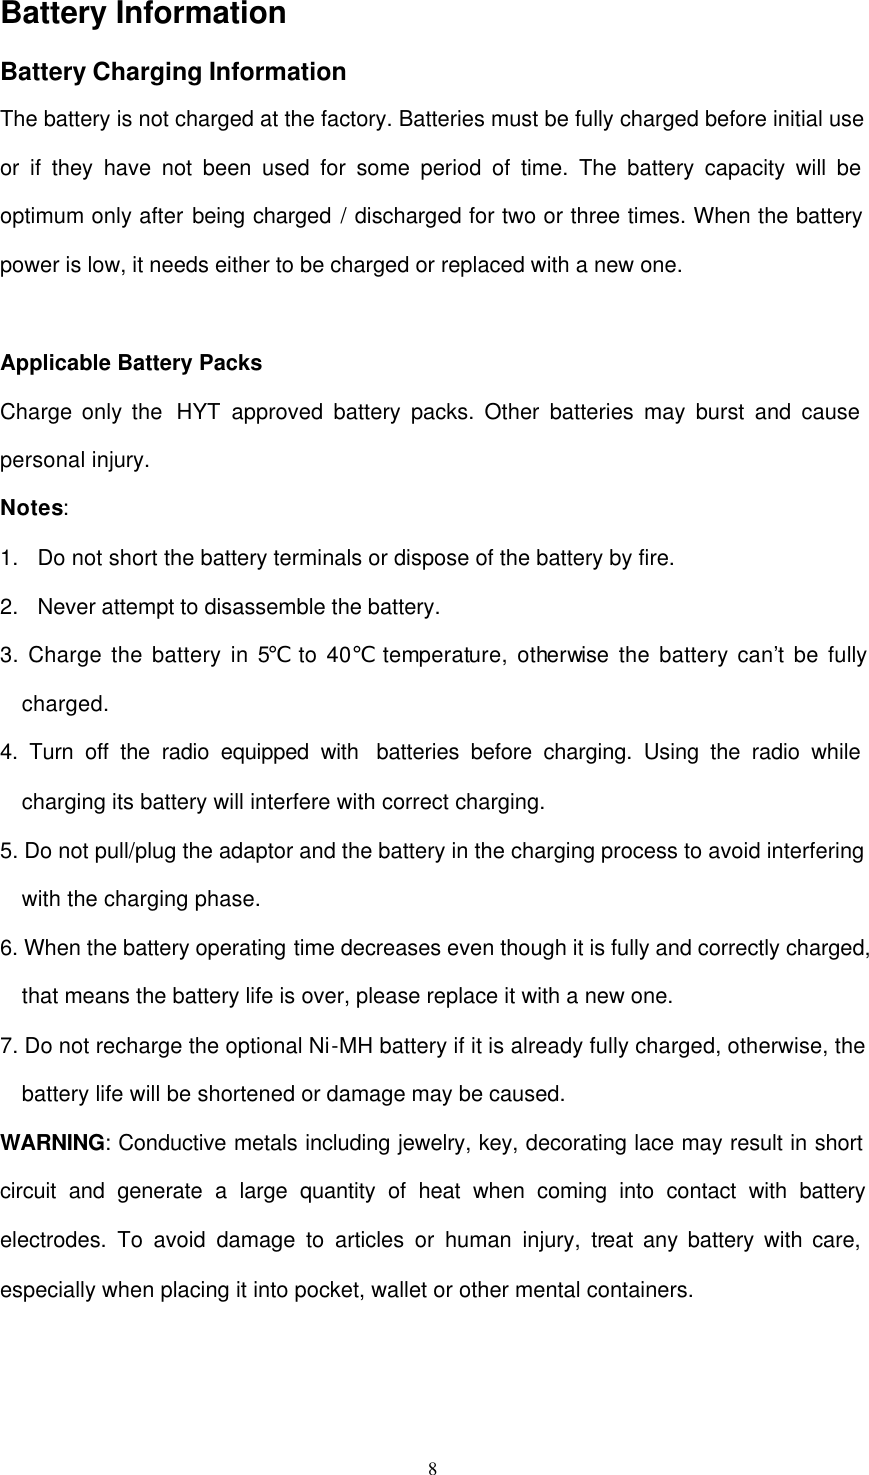  8 Battery Information   Battery Charging Information The battery is not charged at the factory. Batteries must be fully charged before initial use or if they have not been used for some period of time. The battery capacity will be optimum only after being charged / discharged for two or three times. When the battery power is low, it needs either to be charged or replaced with a new one.  Applicable Battery Packs Charge only the  HYT approved battery packs. Other batteries may burst and cause personal injury. Notes: 1. Do not short the battery terminals or dispose of the battery by fire. 2. Never attempt to disassemble the battery. 3. Charge the battery in 5℃ to 40  temperature, otherwise the battery can’t be fully ℃charged. 4. Turn off the radio equipped with  batteries before charging. Using the radio while charging its battery will interfere with correct charging. 5. Do not pull/plug the adaptor and the battery in the charging process to avoid interfering with the charging phase. 6. When the battery operating time decreases even though it is fully and correctly charged, that means the battery life is over, please replace it with a new one. 7. Do not recharge the optional Ni-MH battery if it is already fully charged, otherwise, the battery life will be shortened or damage may be caused. WARNING: Conductive metals including jewelry, key, decorating lace may result in short circuit and generate a large quantity of heat when coming into contact with battery electrodes. To avoid damage to articles or human injury, treat any battery with care, especially when placing it into pocket, wallet or other mental containers.  